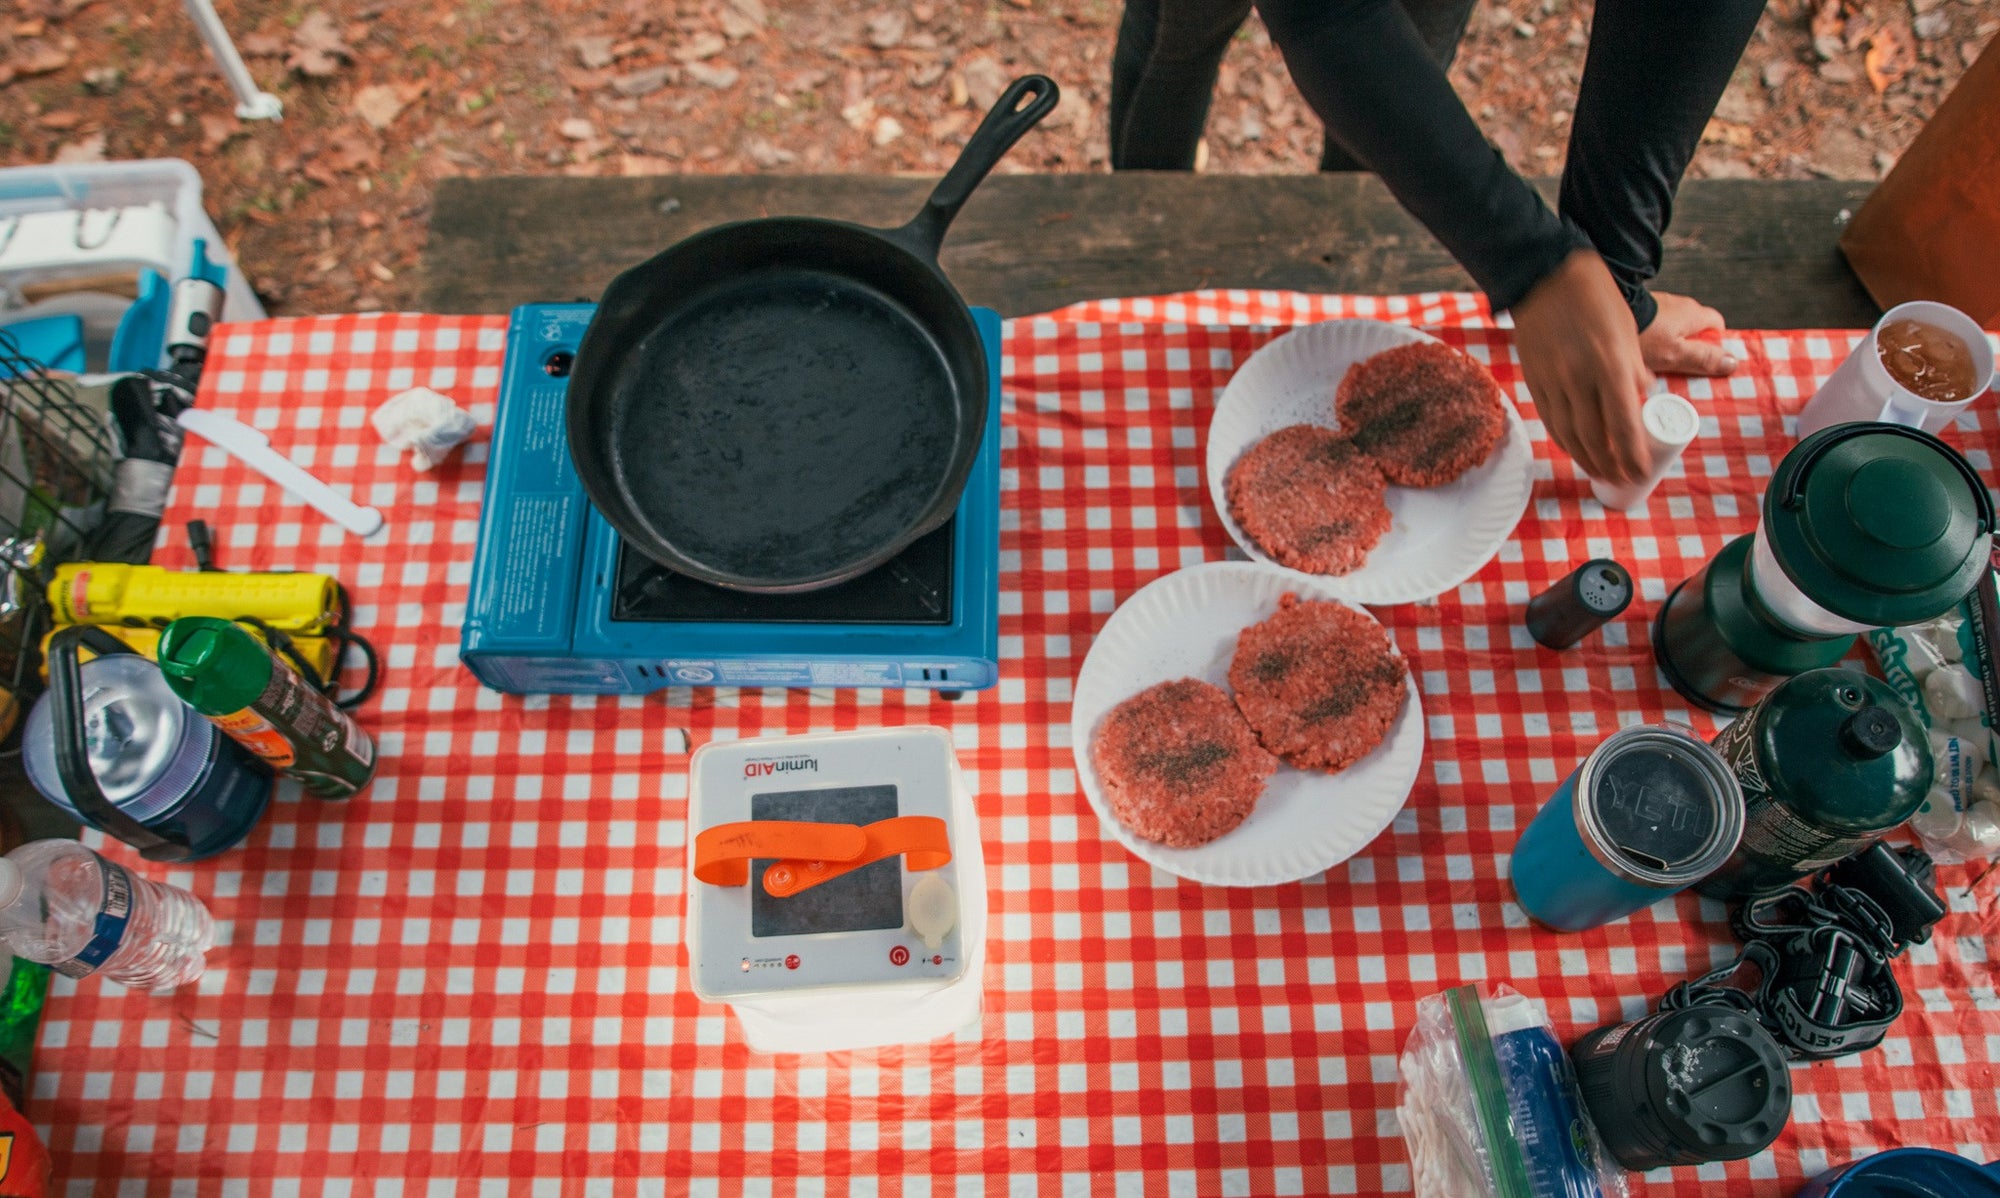 Camping stove and burgers atop a picnic table. Source: Zoe Szabo (IG: @zoeszabophotography)